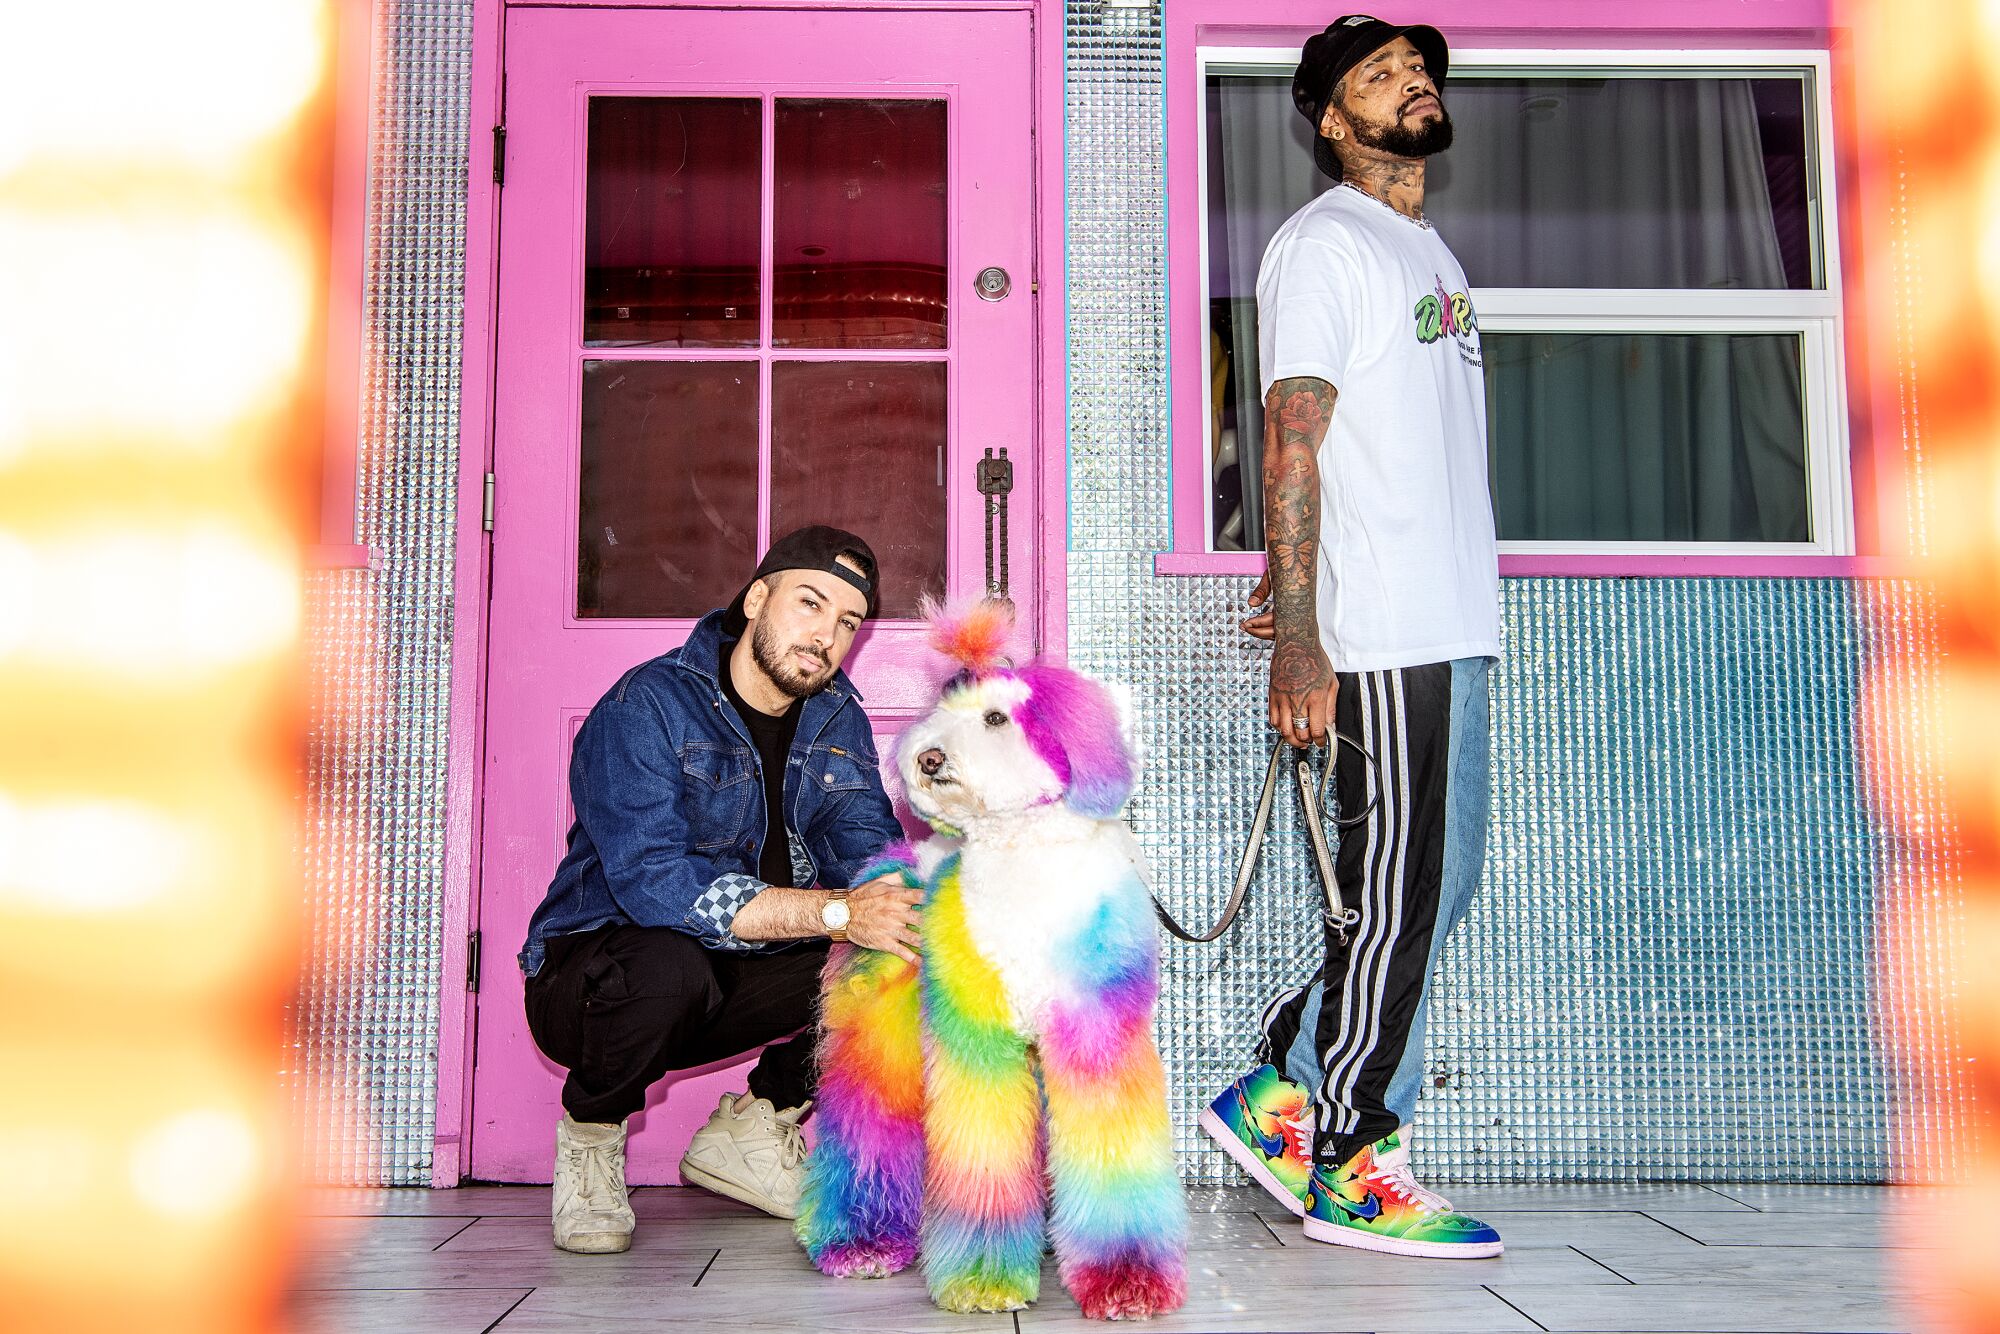 A man crouches down with a tie-dyed dog while another man stands holding a leash